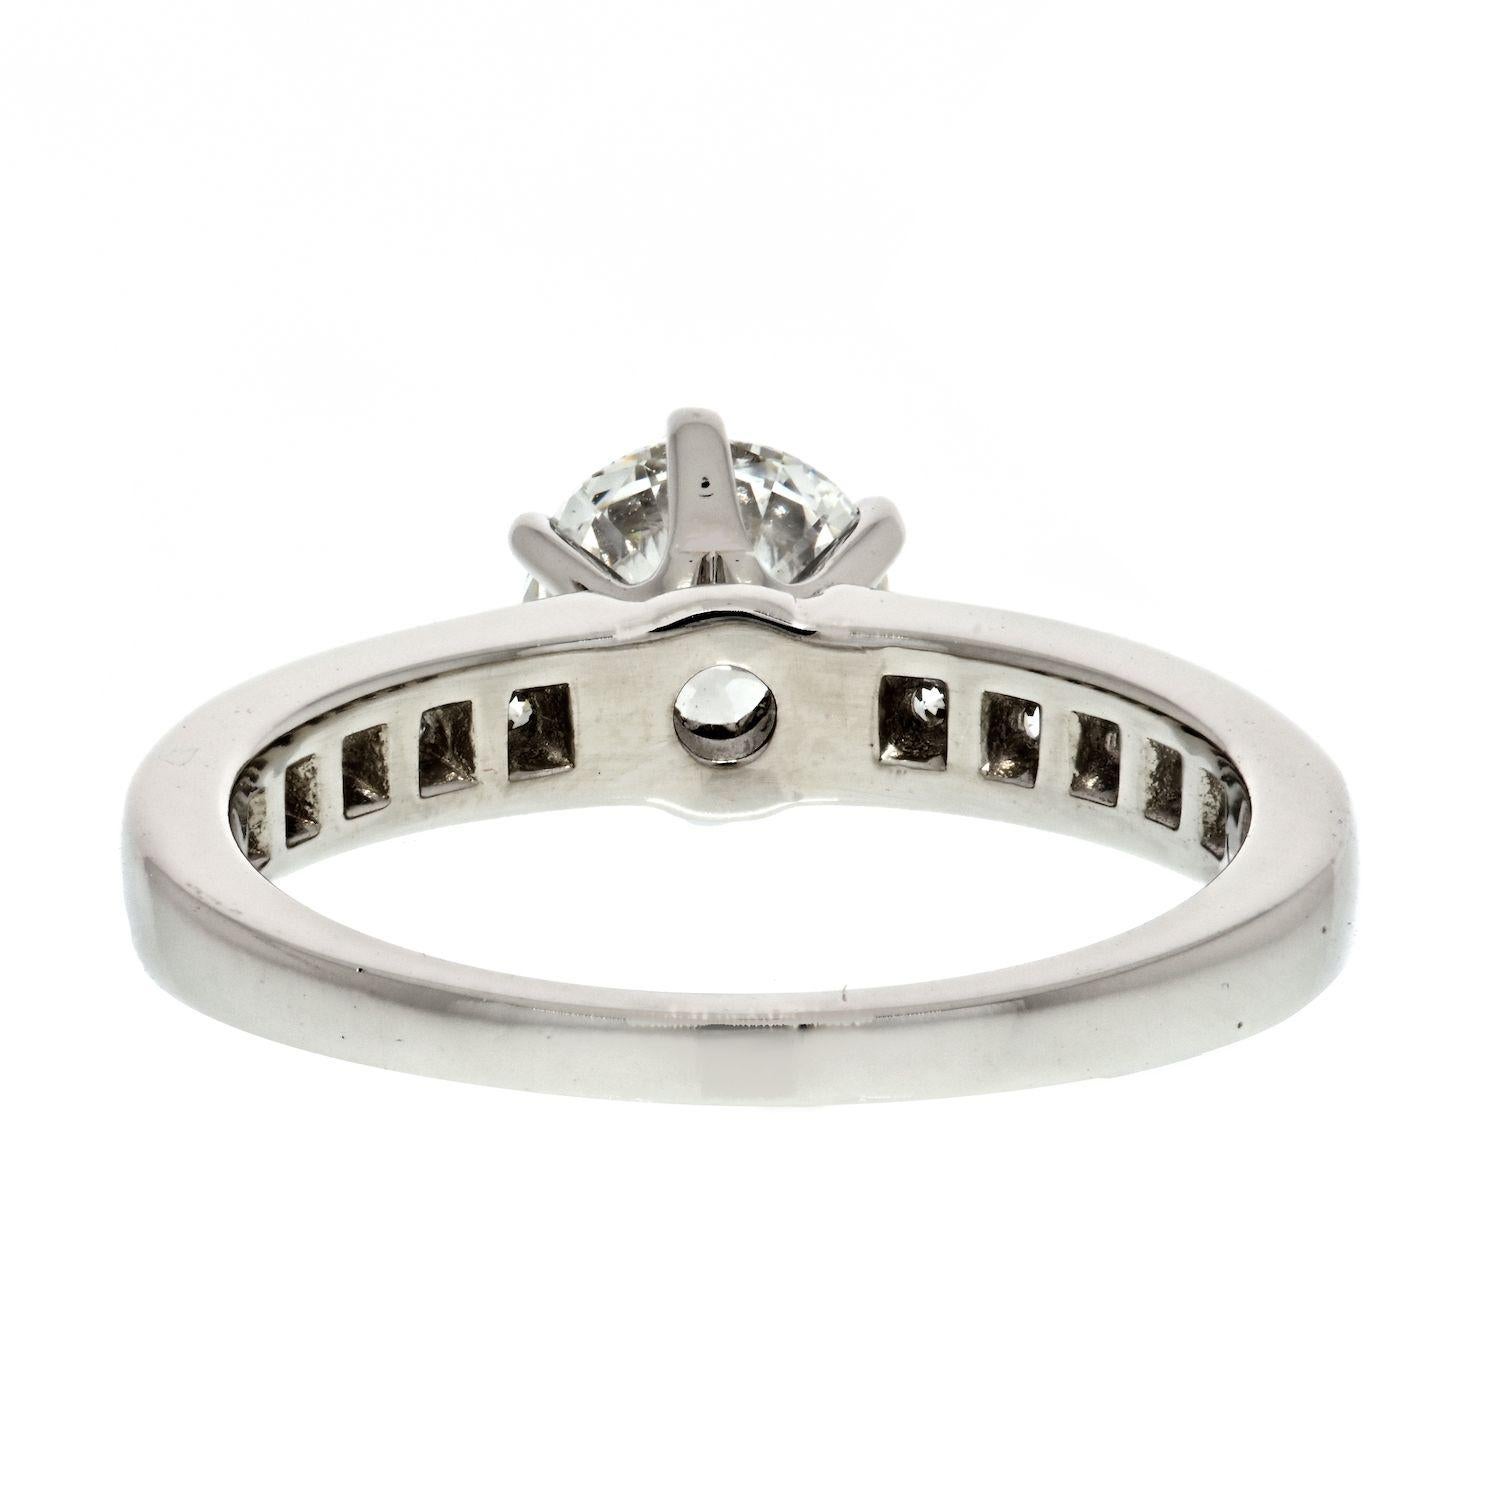 This is original Tiffany & Co. 0.99ct Round Cut H VVS1 Six Prong Diamond Engagement Ring. Mounted in platinum this ring features a round center diamond, accented with channel set diamonds on the sides.
This ring comes with it's original Tiffany & Co